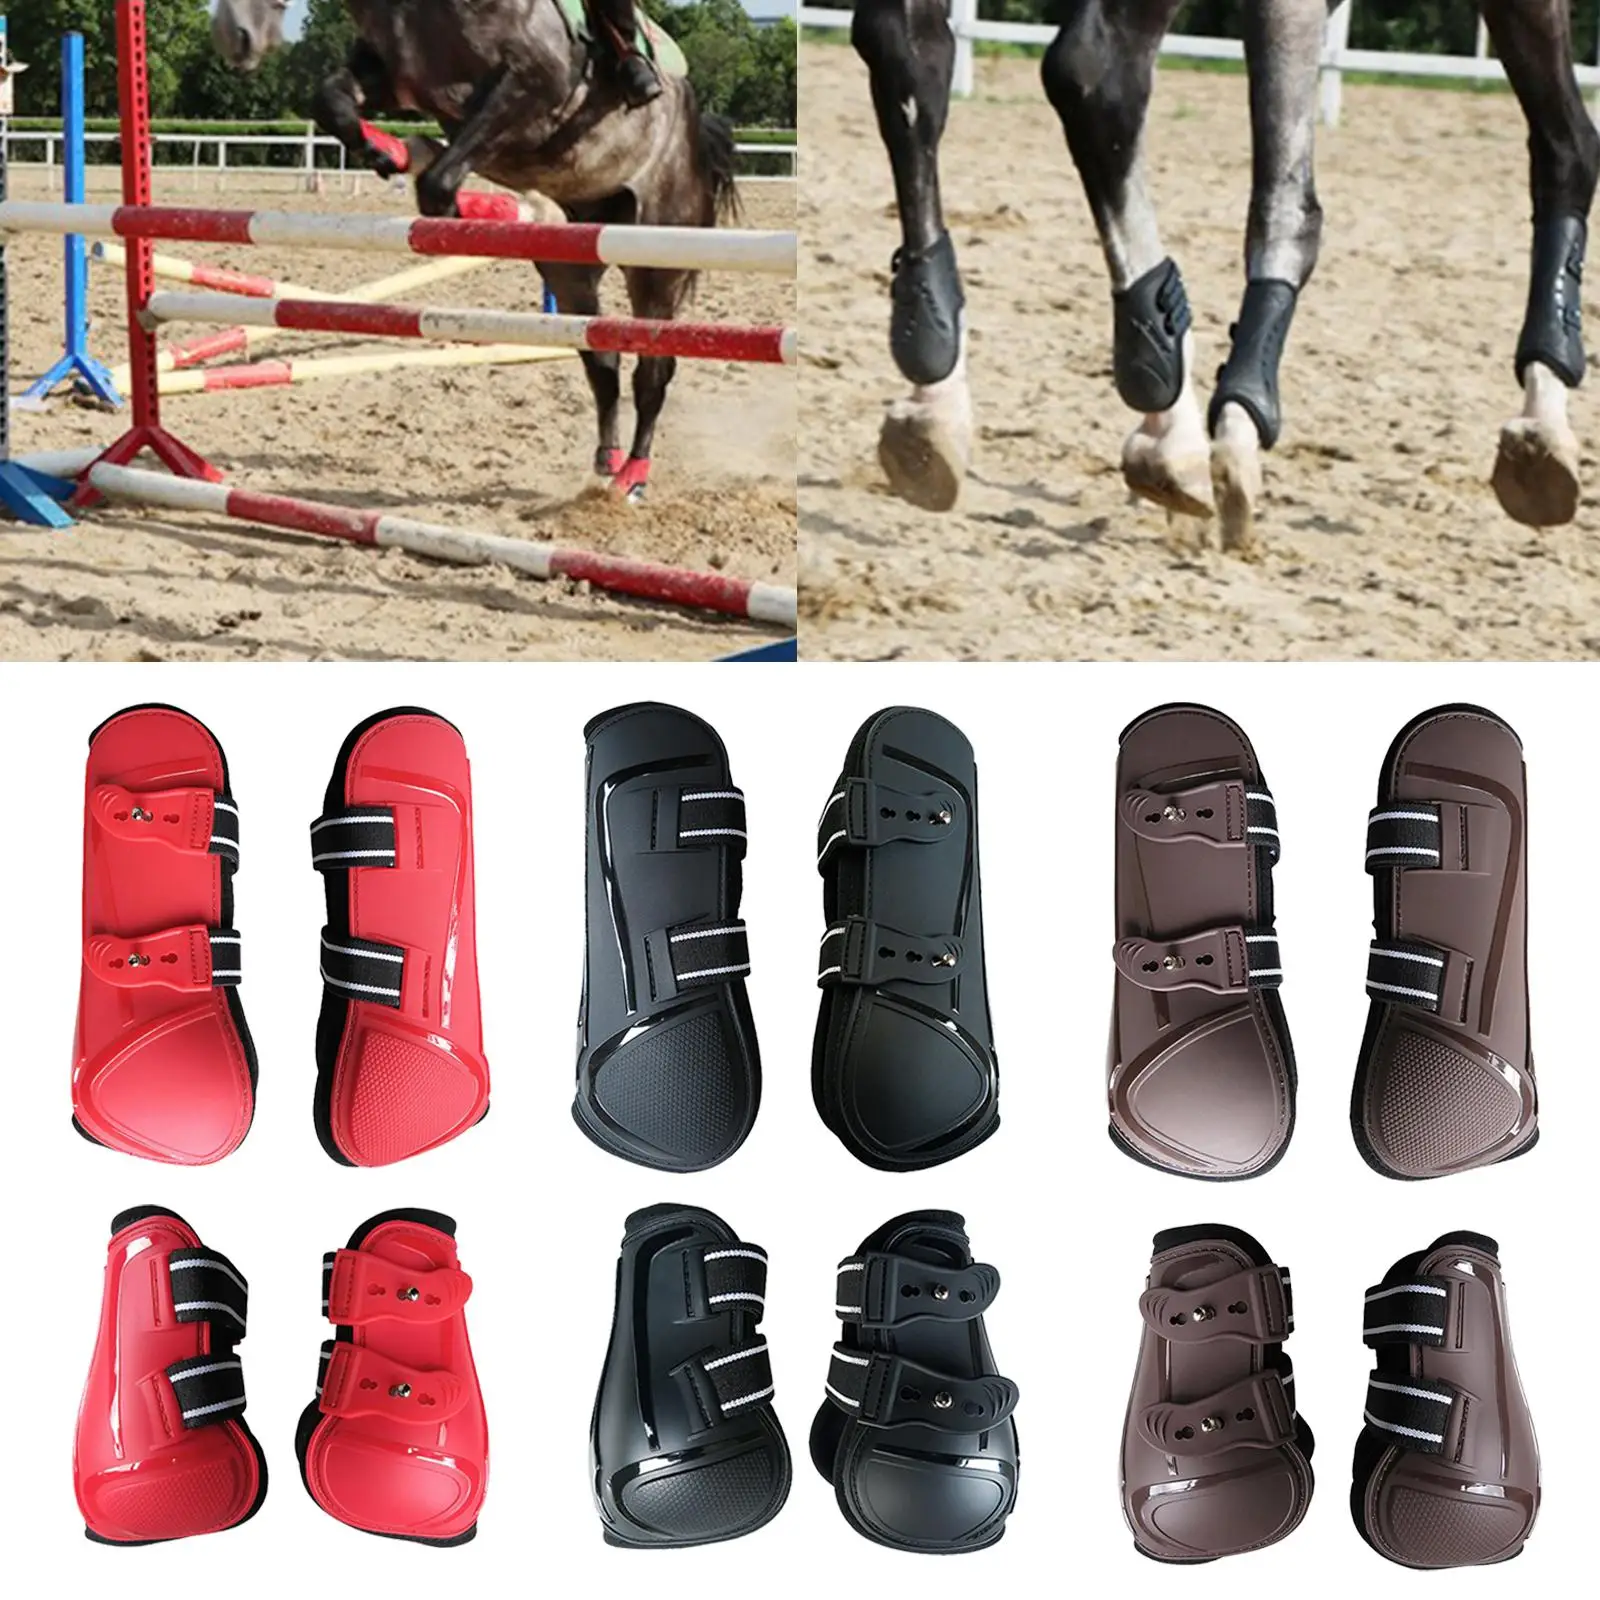 Horse tendon boots 4 set riding jumping dressage foot protector accessories